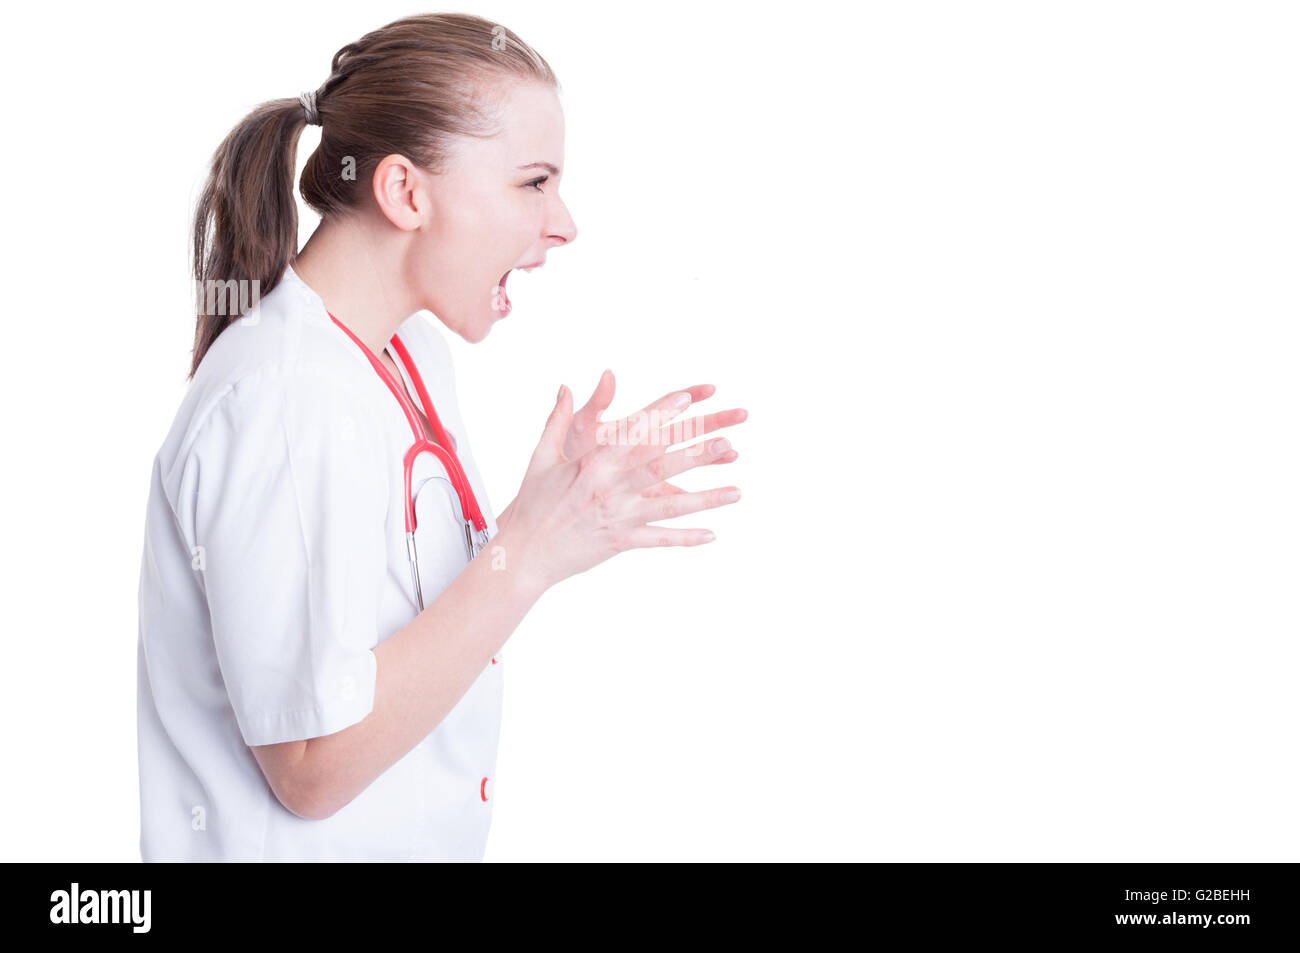 Furious female doctor model screaming and arguing with someone with mouth wide open with copypaste isolated on white background Stock Photo